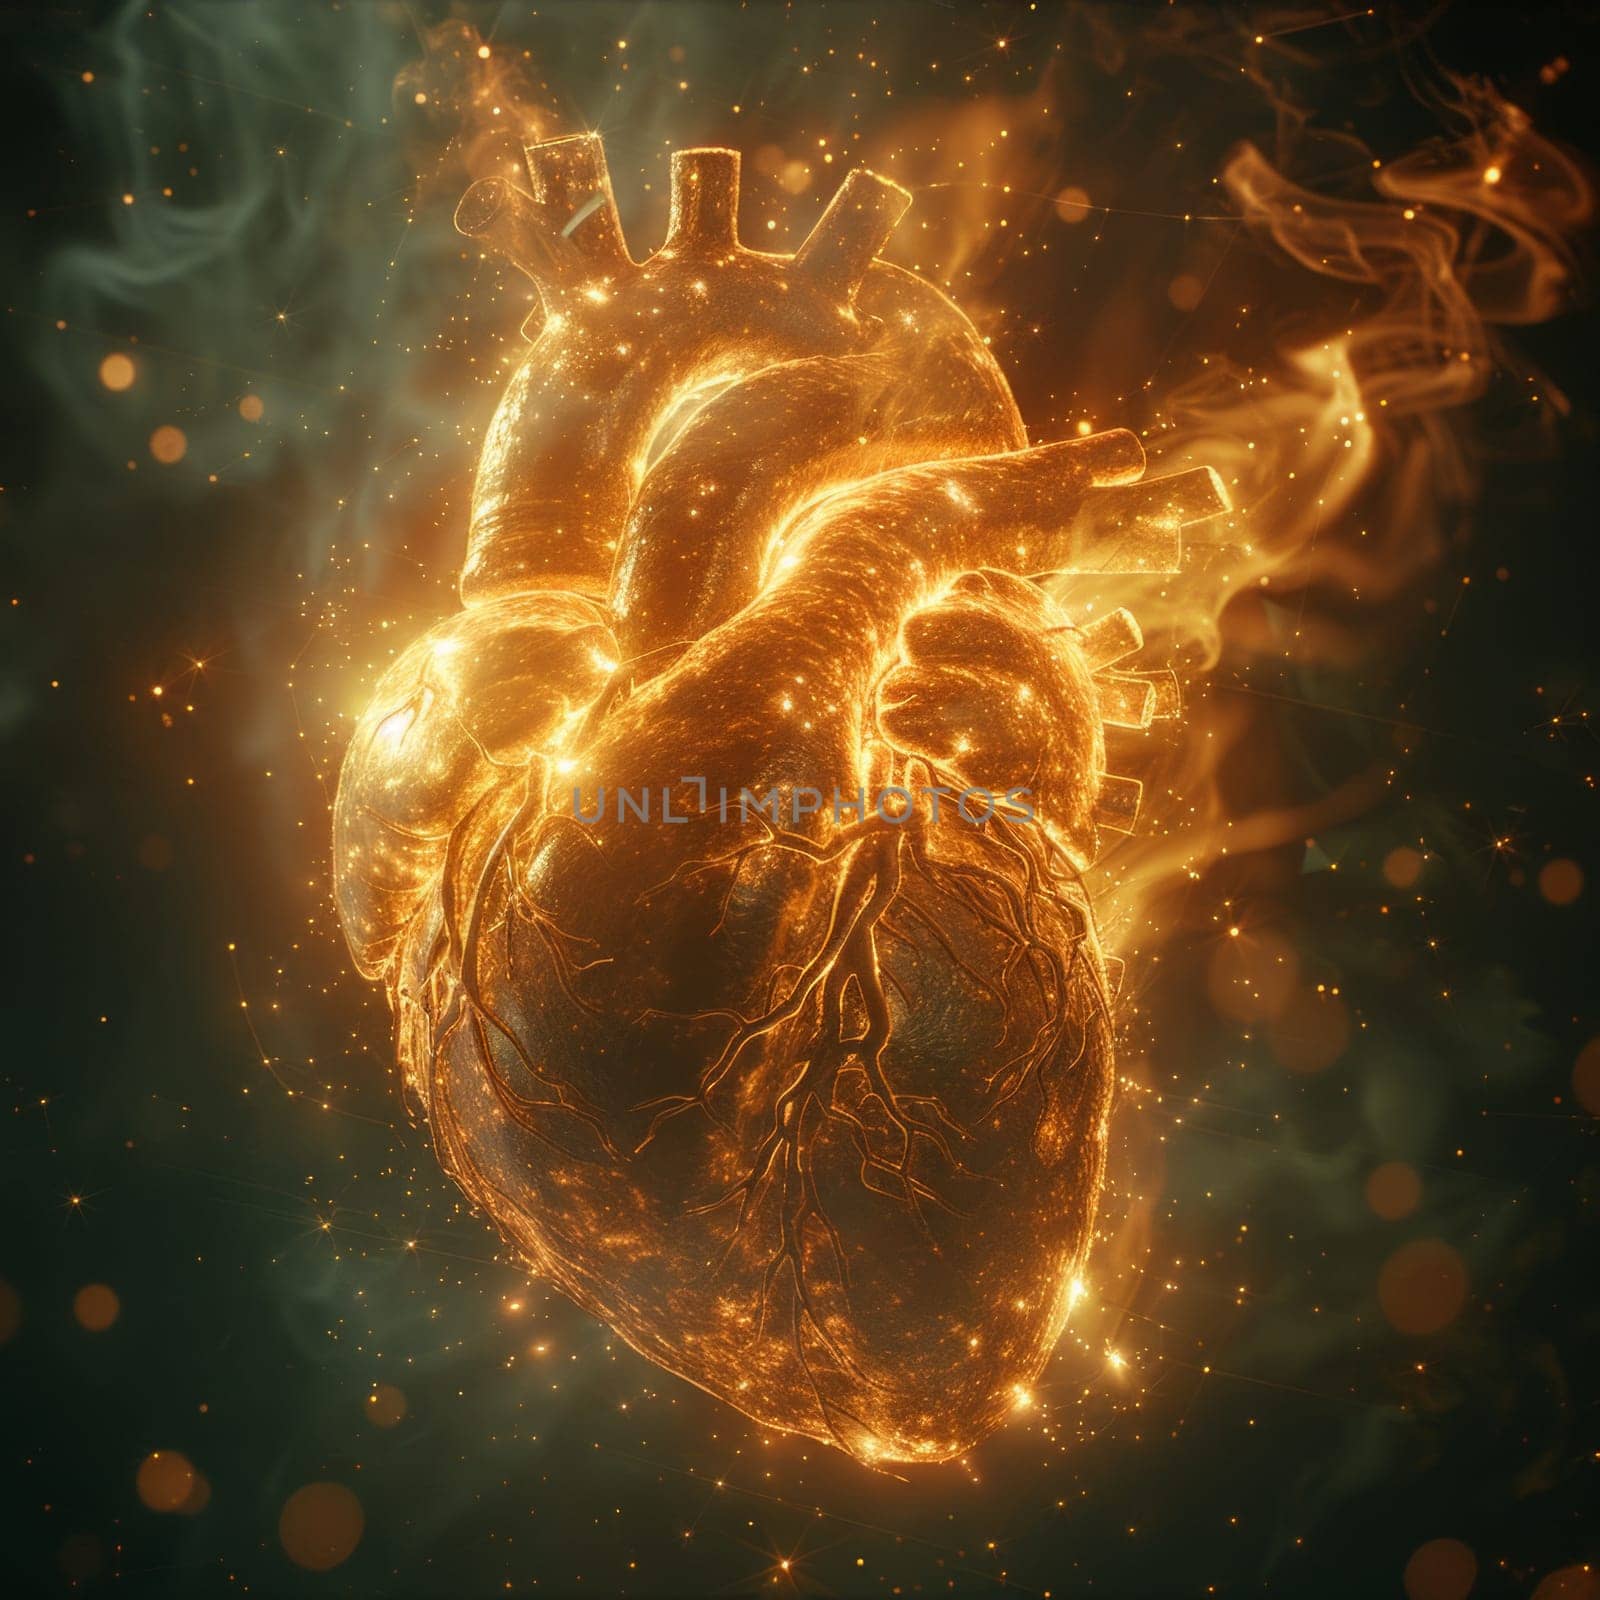 A heart engulfed in flames against a black background, radiating warmth and passion.